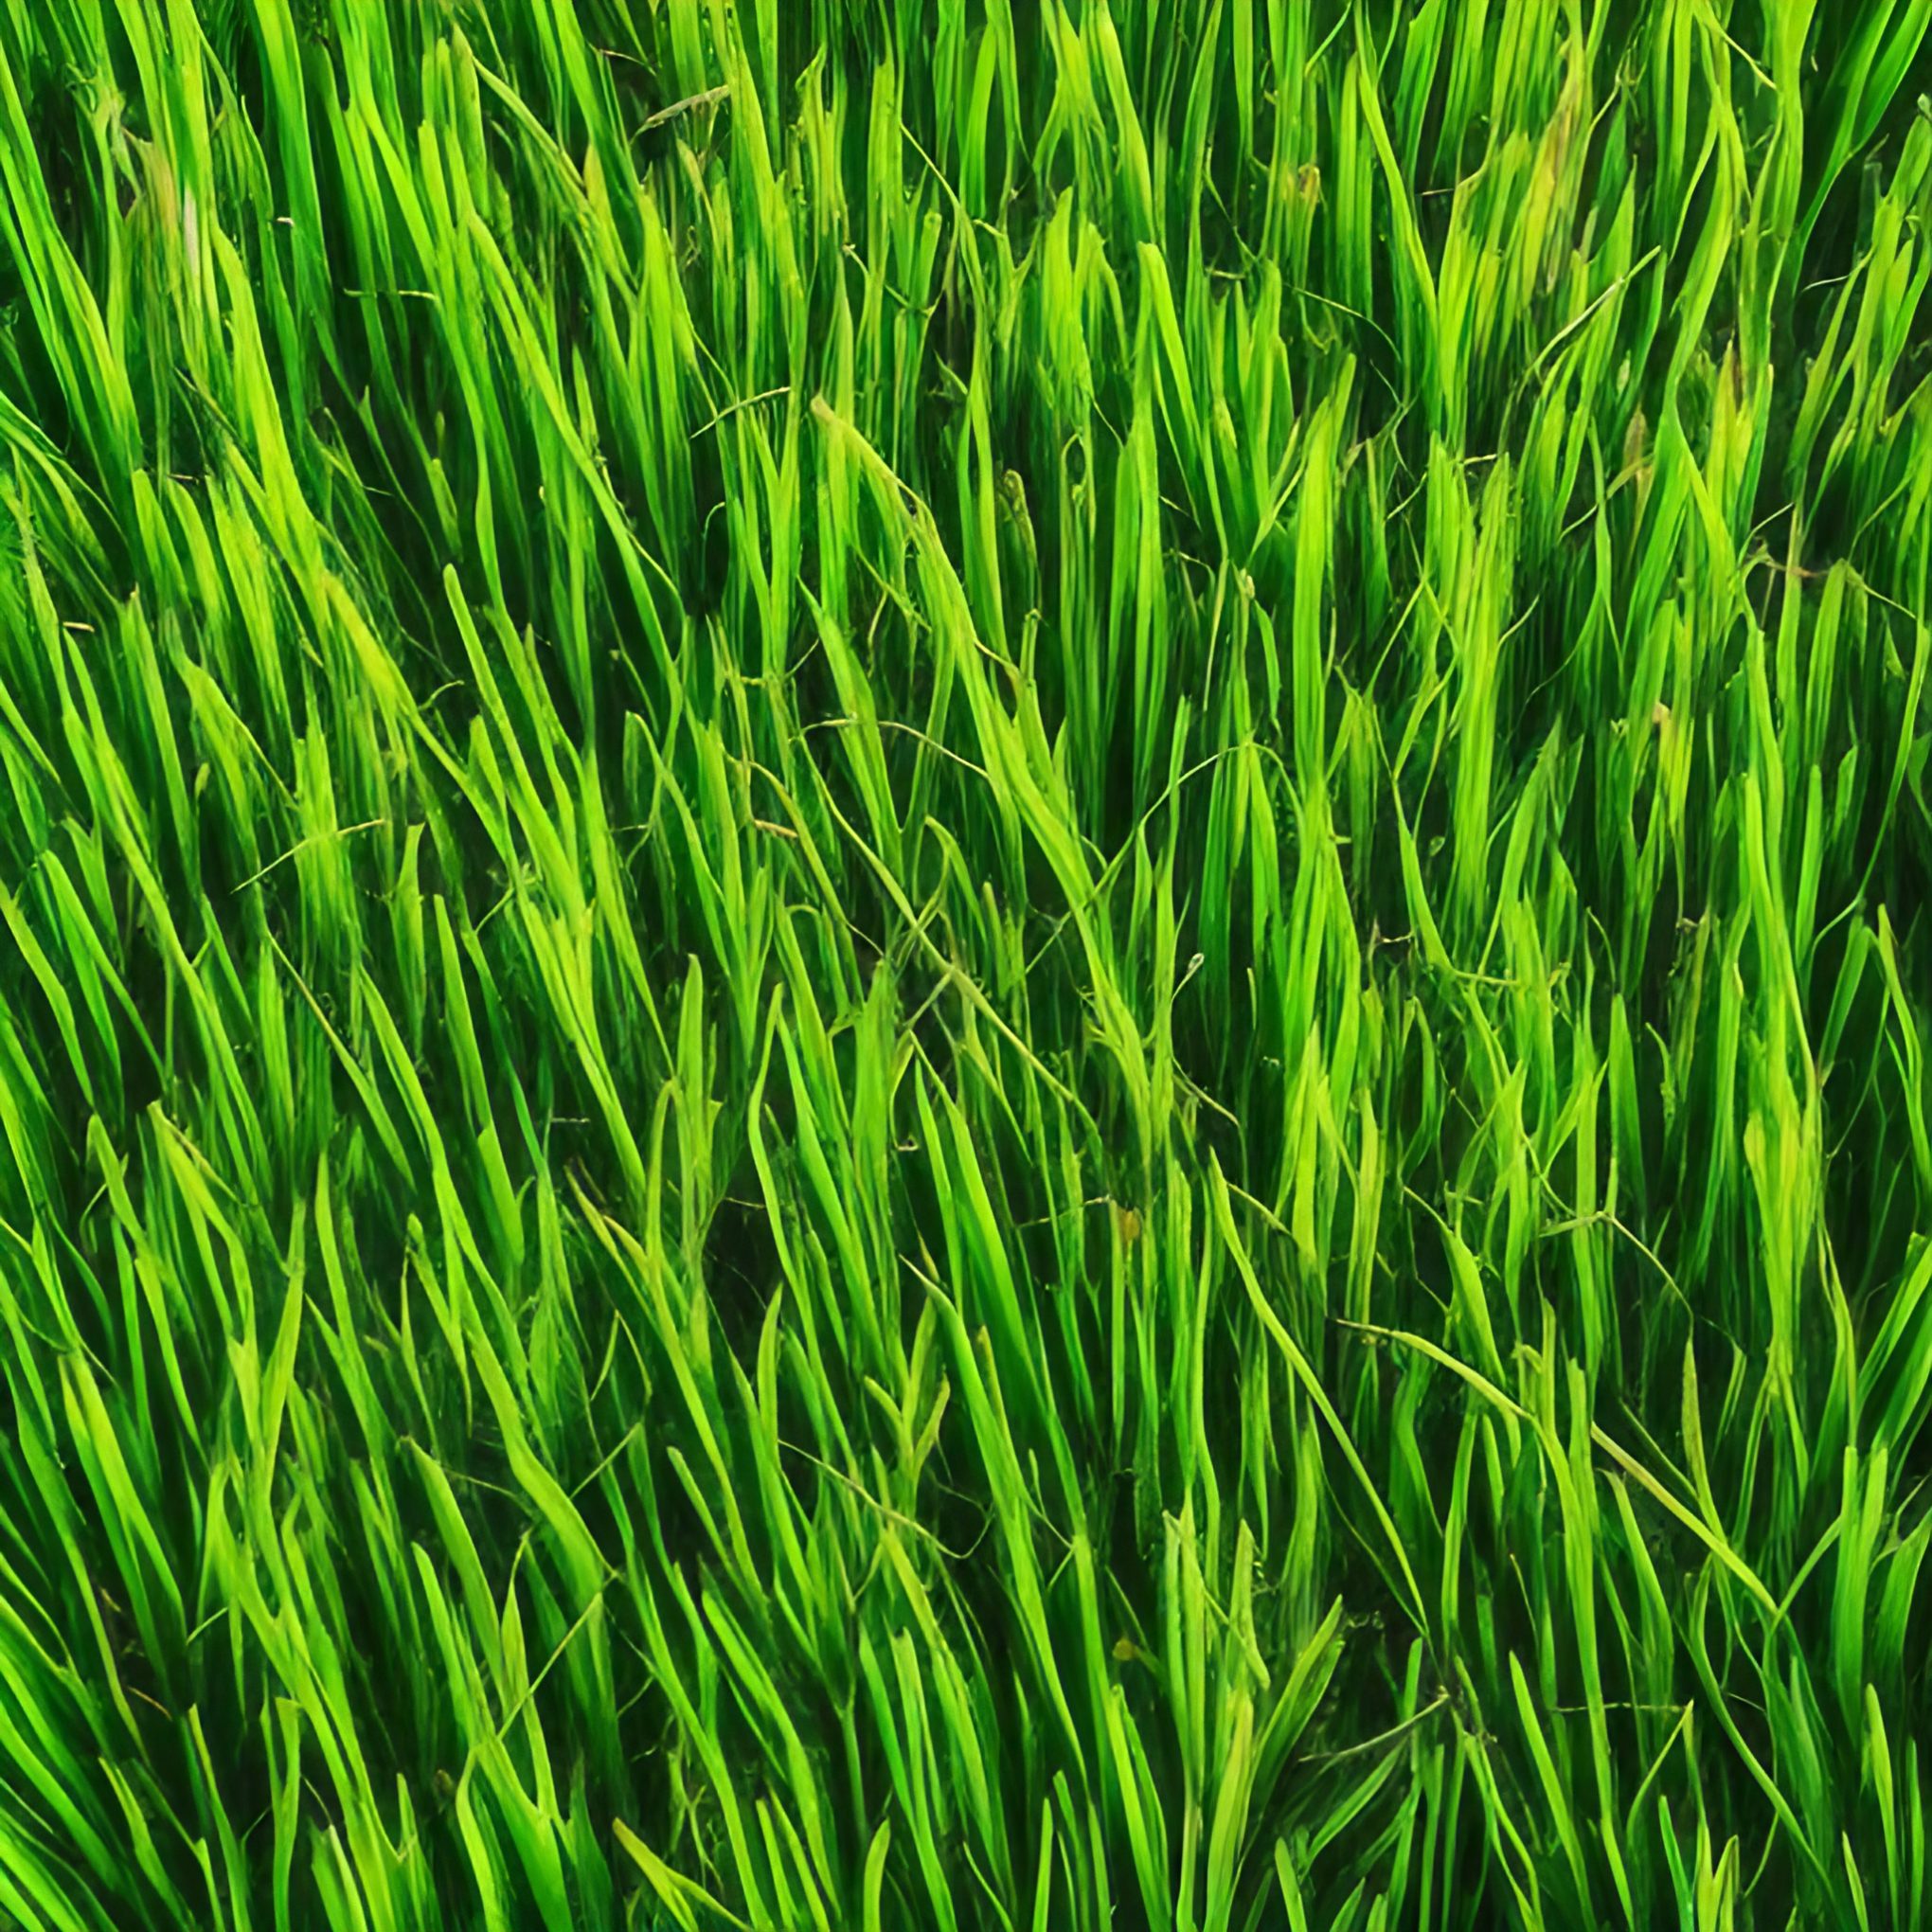 Free stock photo of grass lawn, close up shot